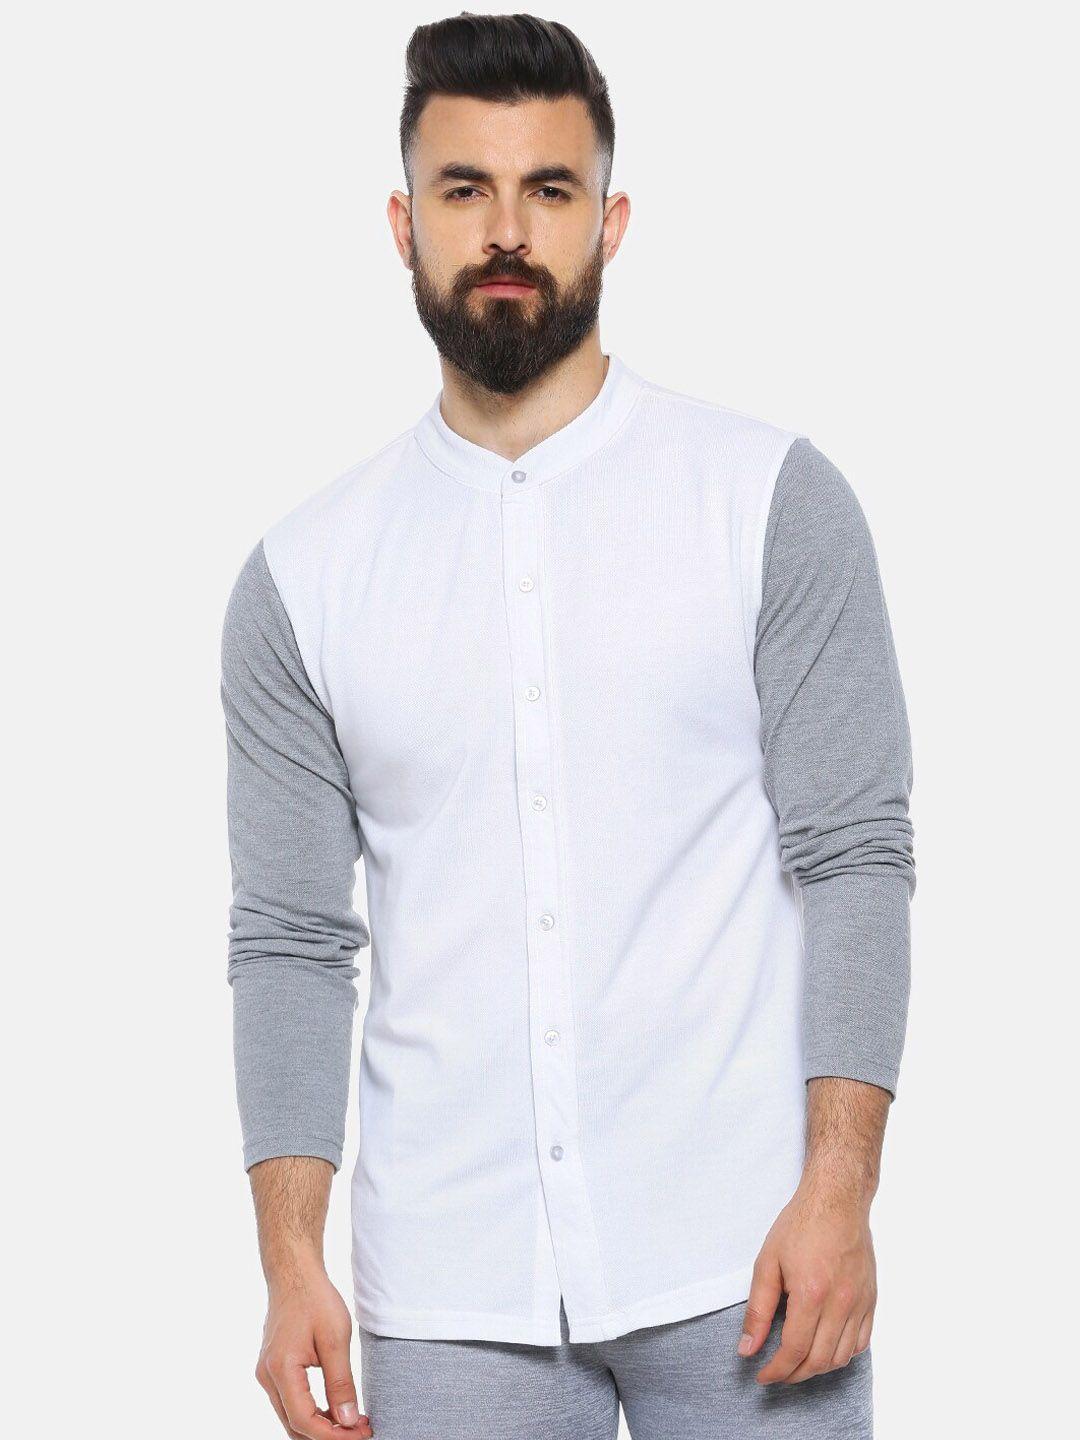 campus sutra men white & grey regular fit solid casual shirt